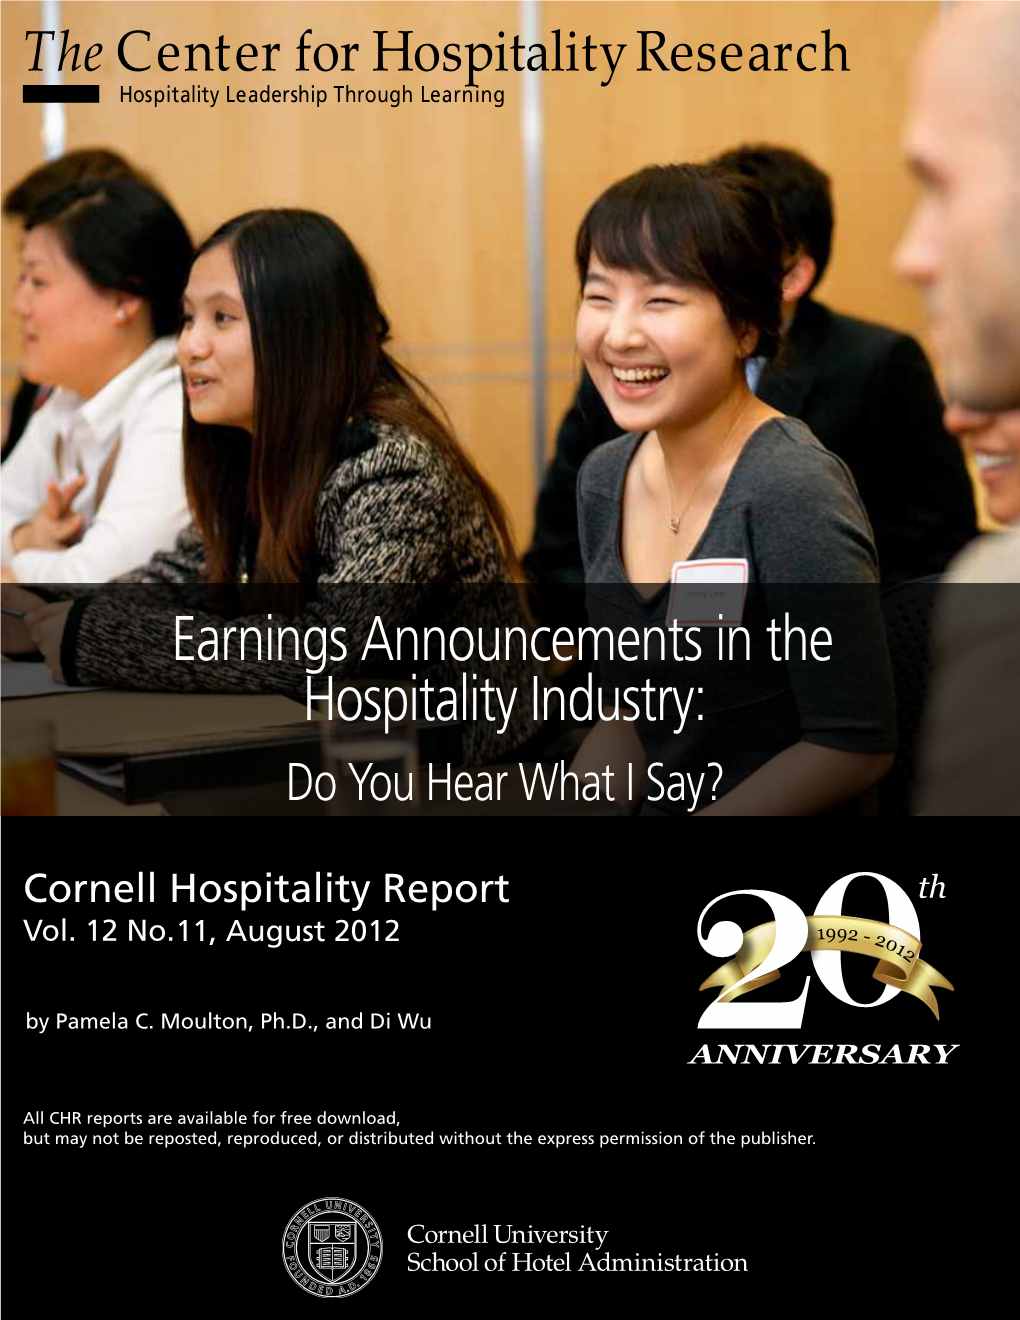 Earnings Announcements in the Hospitality Industry: Do You Hear What I Say?